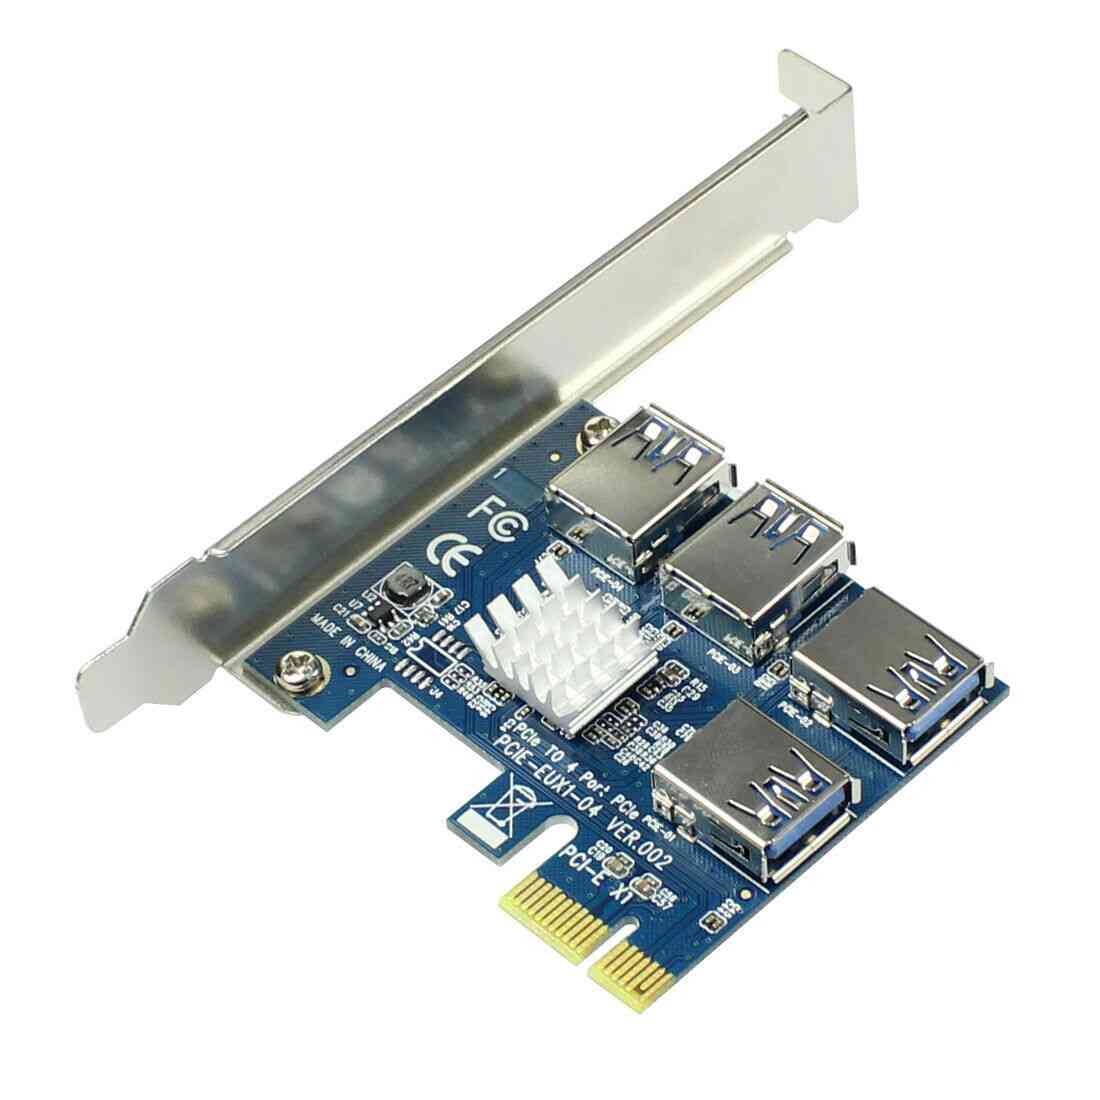 Usb 3.0- Mining Special Riser Card, Pcie Converter Adapter For Video Card